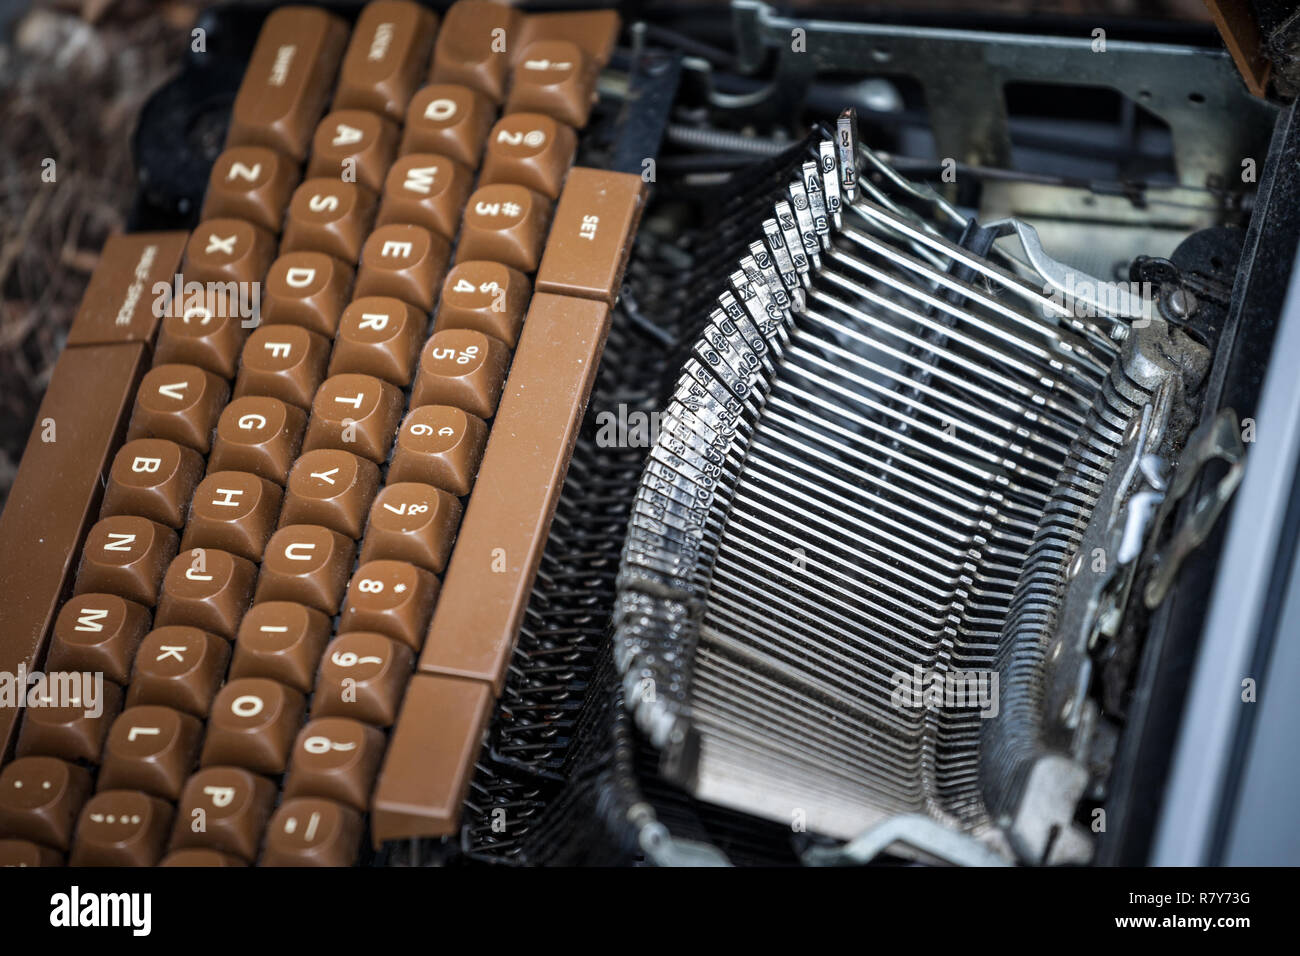 Old and broken typewriter, obsolete, with the blades and the QWERTY keyboard remaining following heavy damage caused by age.   Picture of a vintage ty Stock Photo